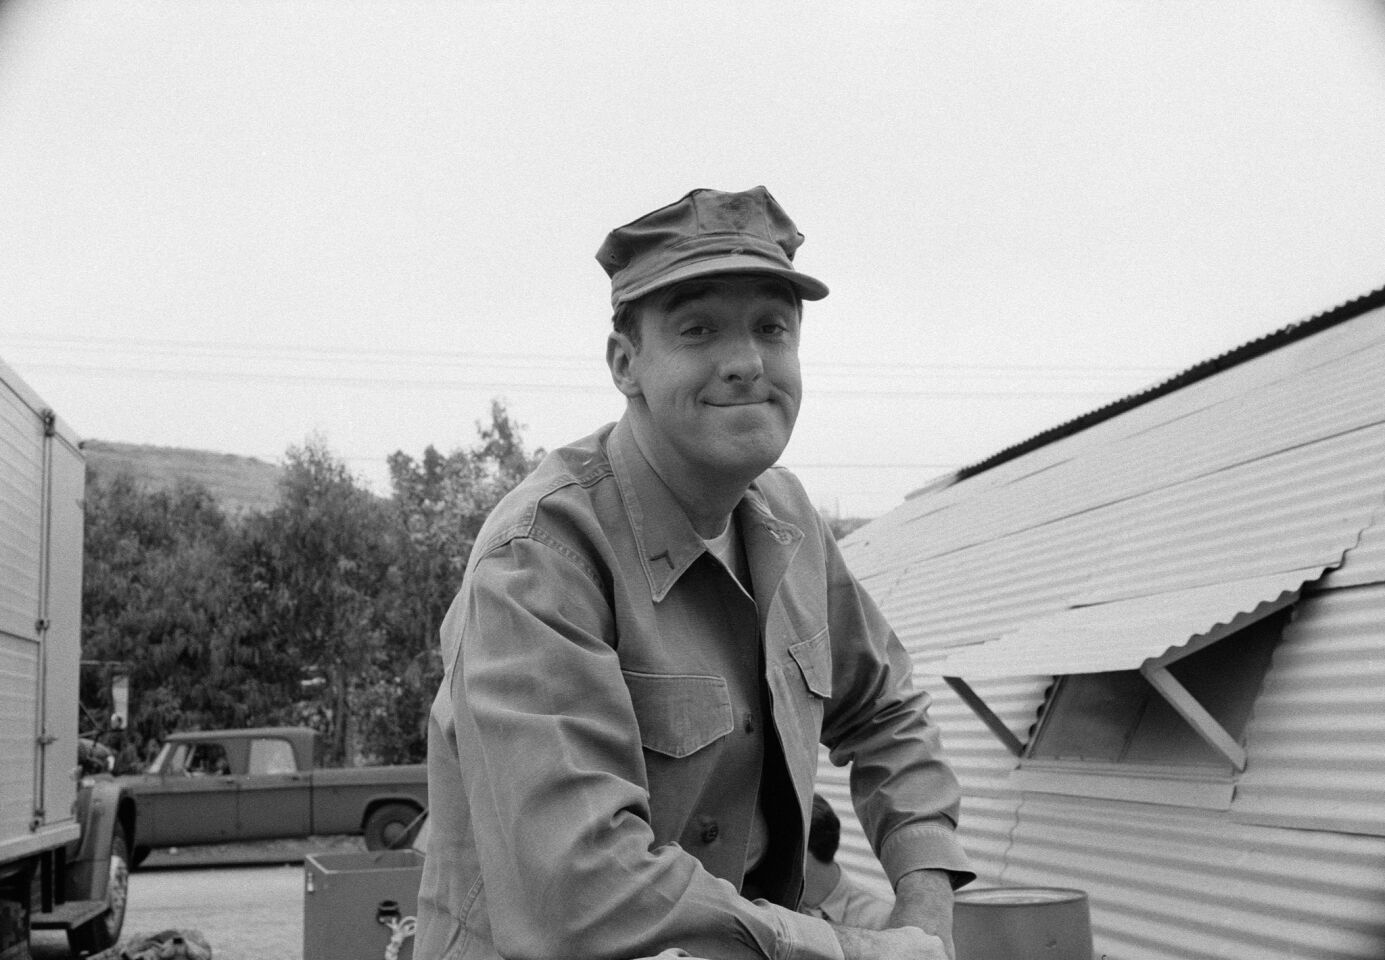 The singer and actor became a TV icon in the 1960s playing the lovably naïve Gomer Pyle on “The Andy Griffith Show” and the spinoff series “Gomer Pyle, U.S.M.C.” He was 87. Full obituary